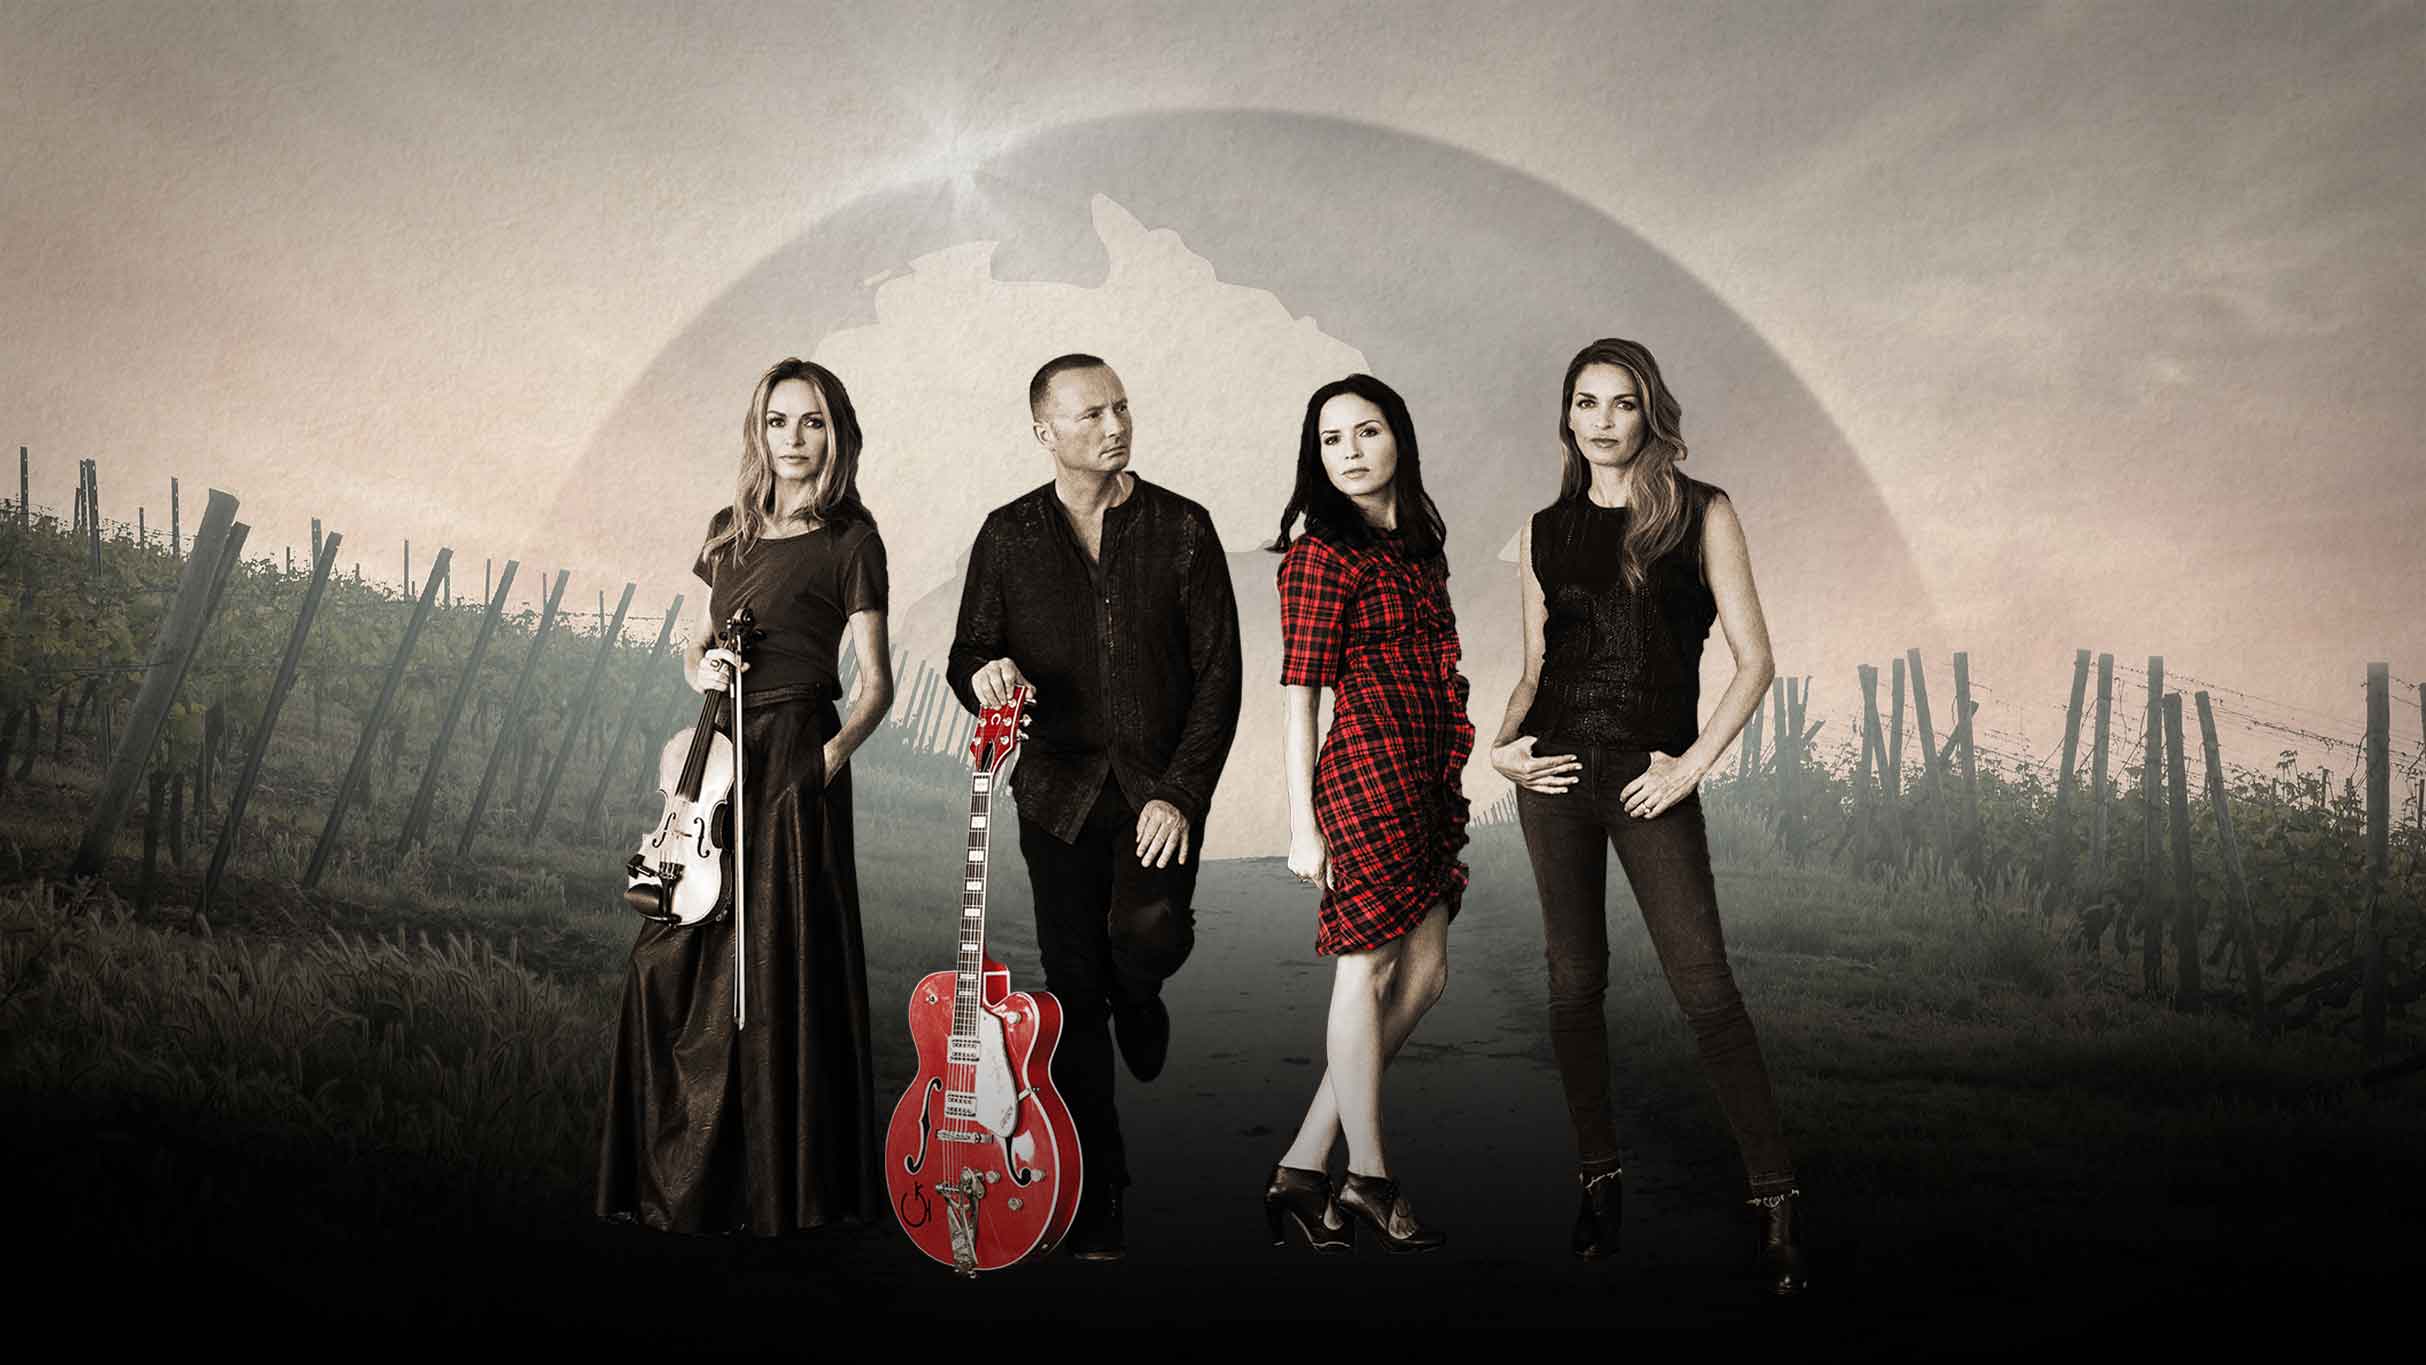 Image used with permission from Ticketmaster | The Corrs Down Under tickets